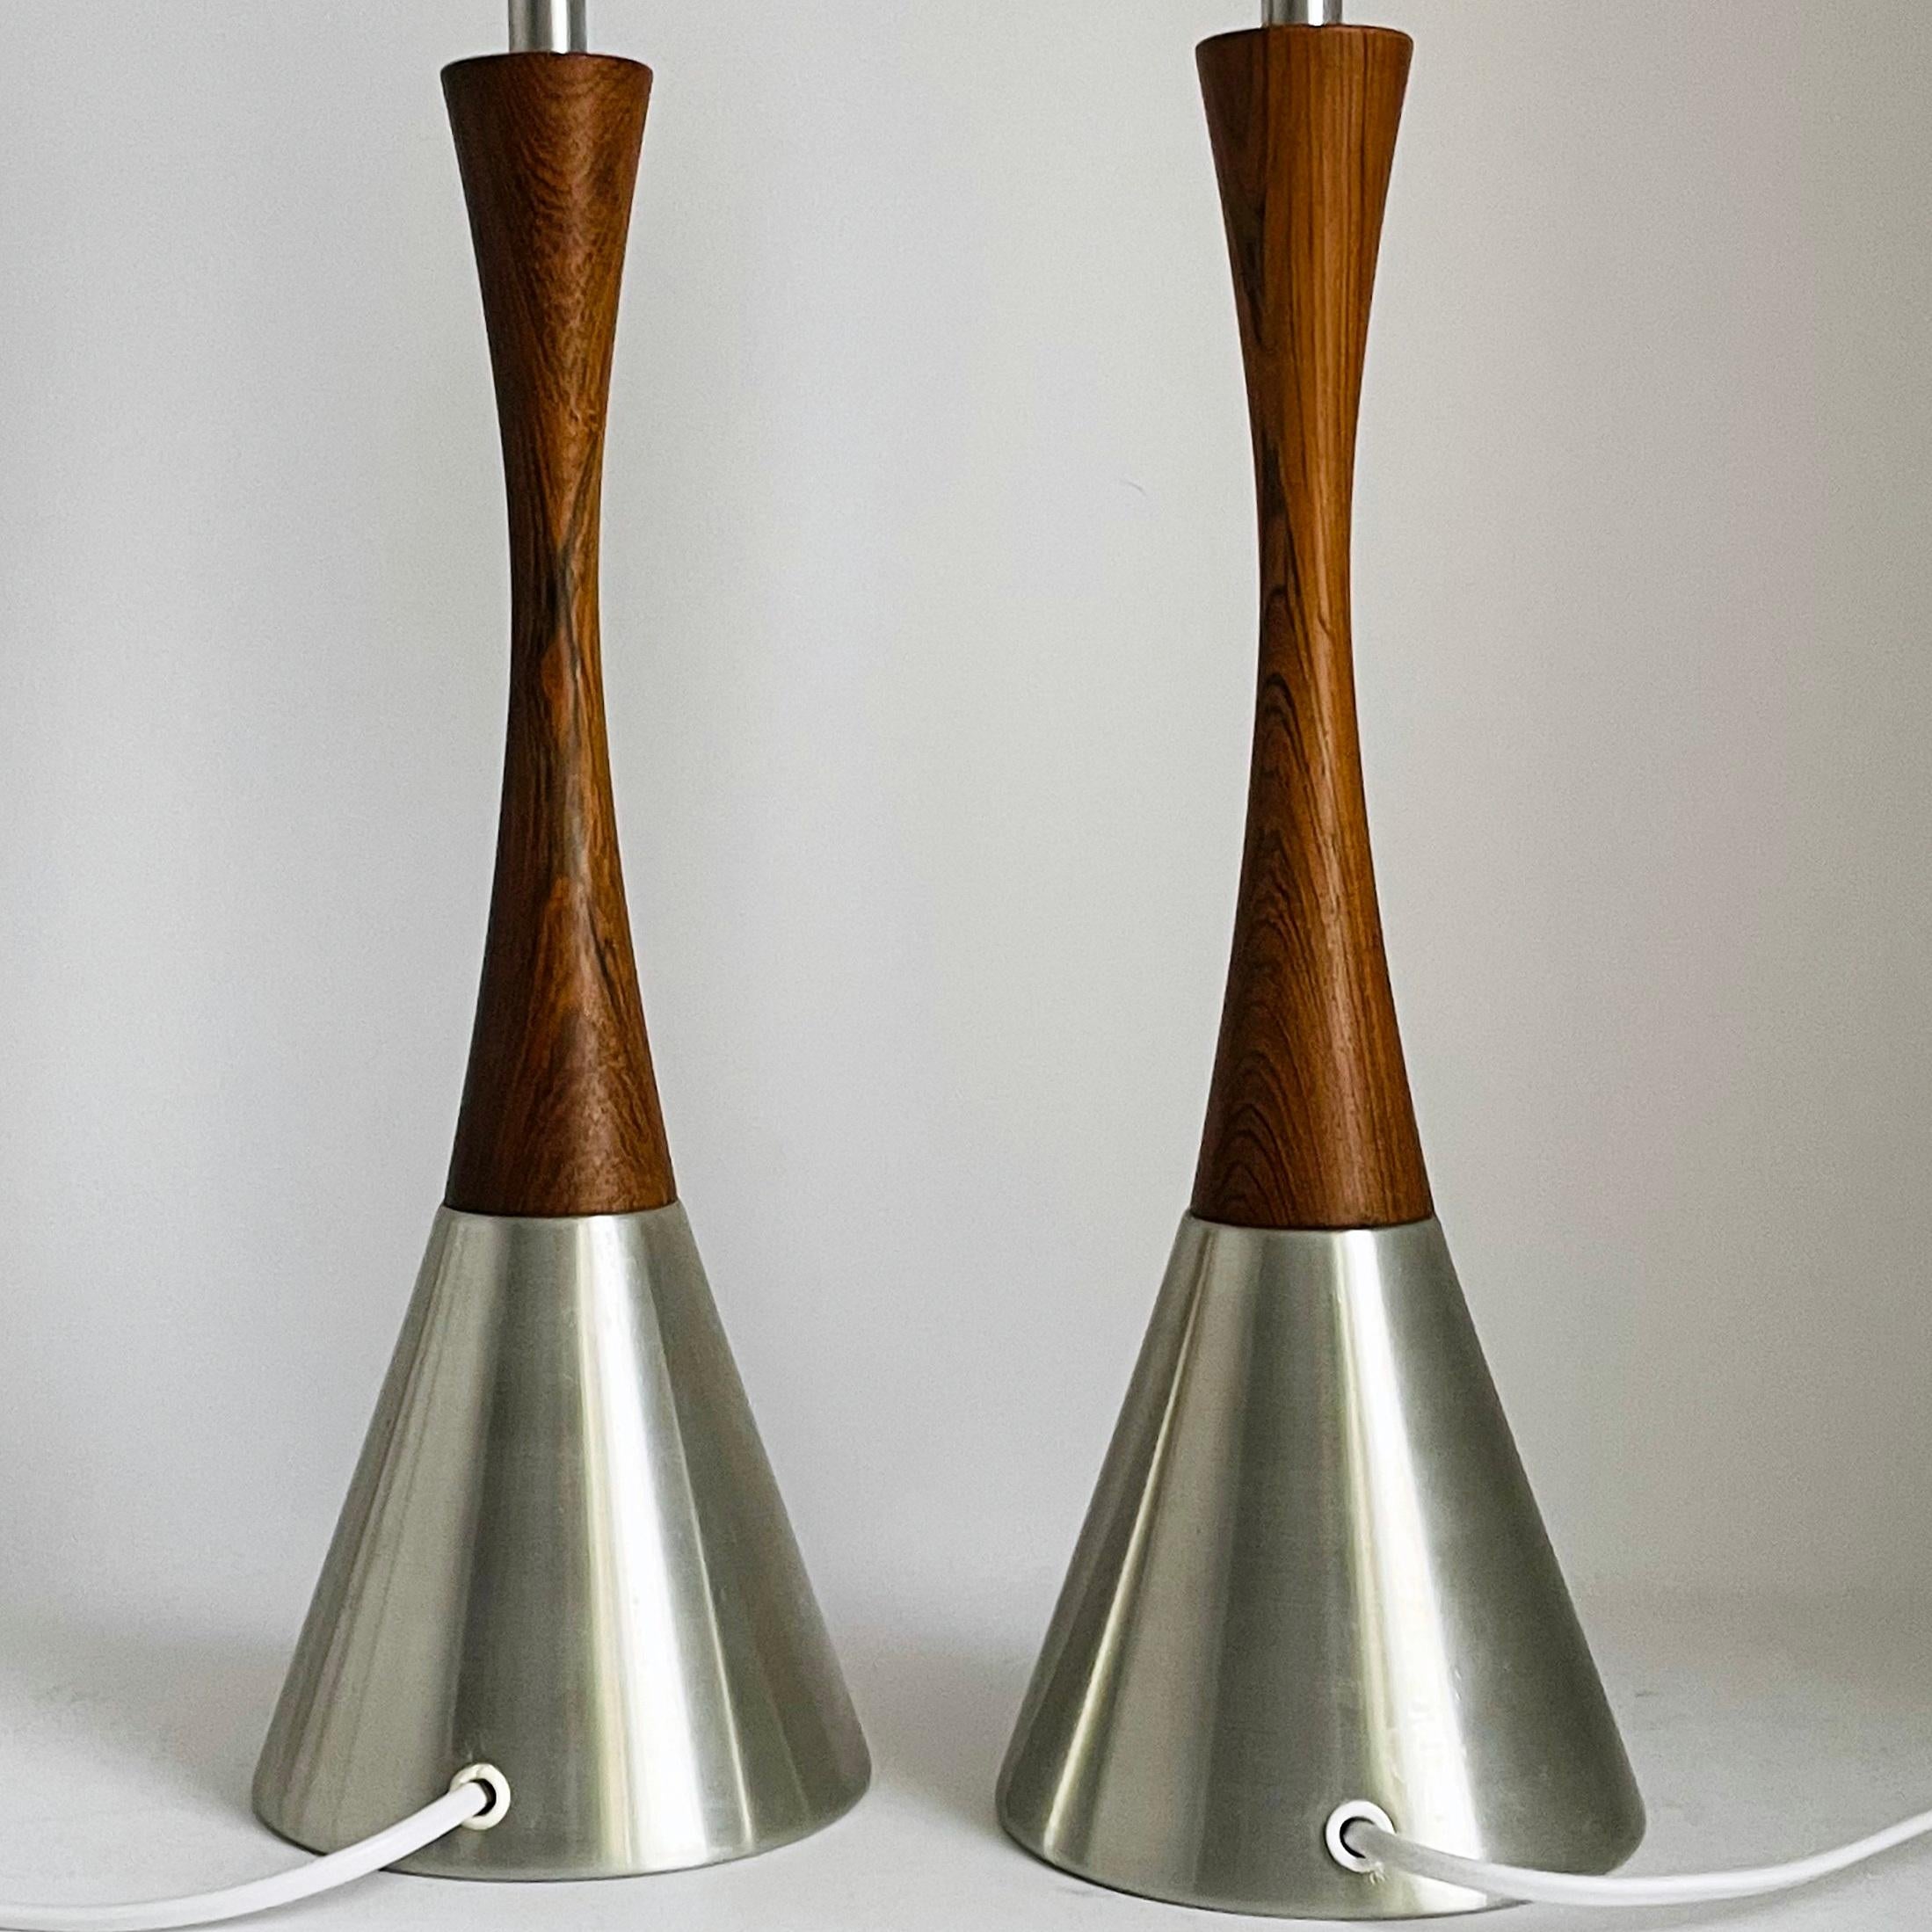 Stained Pair of Scandinavian Midcentury Table Lamps by Bergboms, Sweden